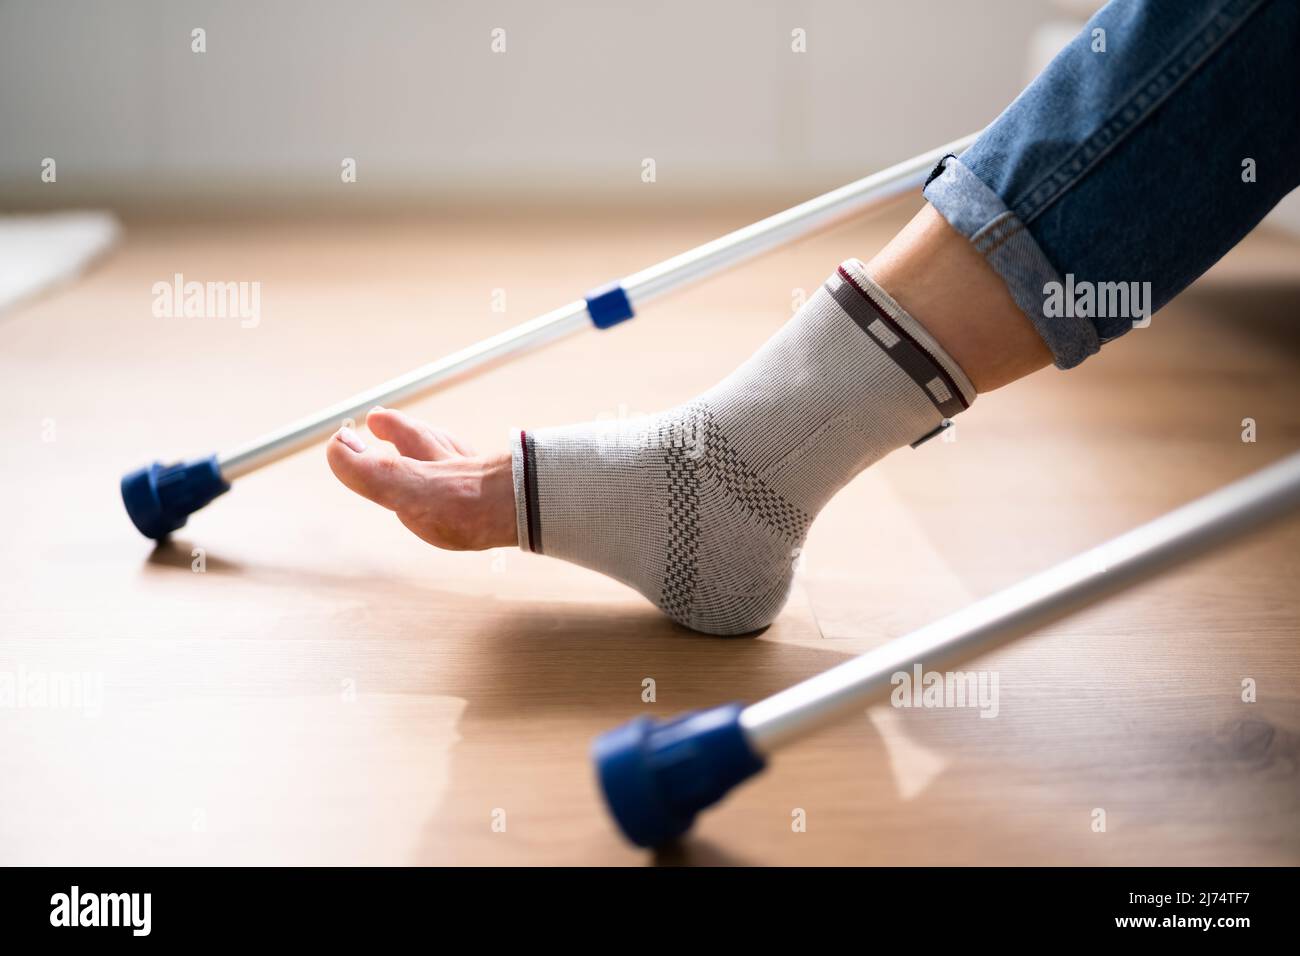 Ankle Sprain Bandage. Medical Foot Trauma Therapy Stock Photo